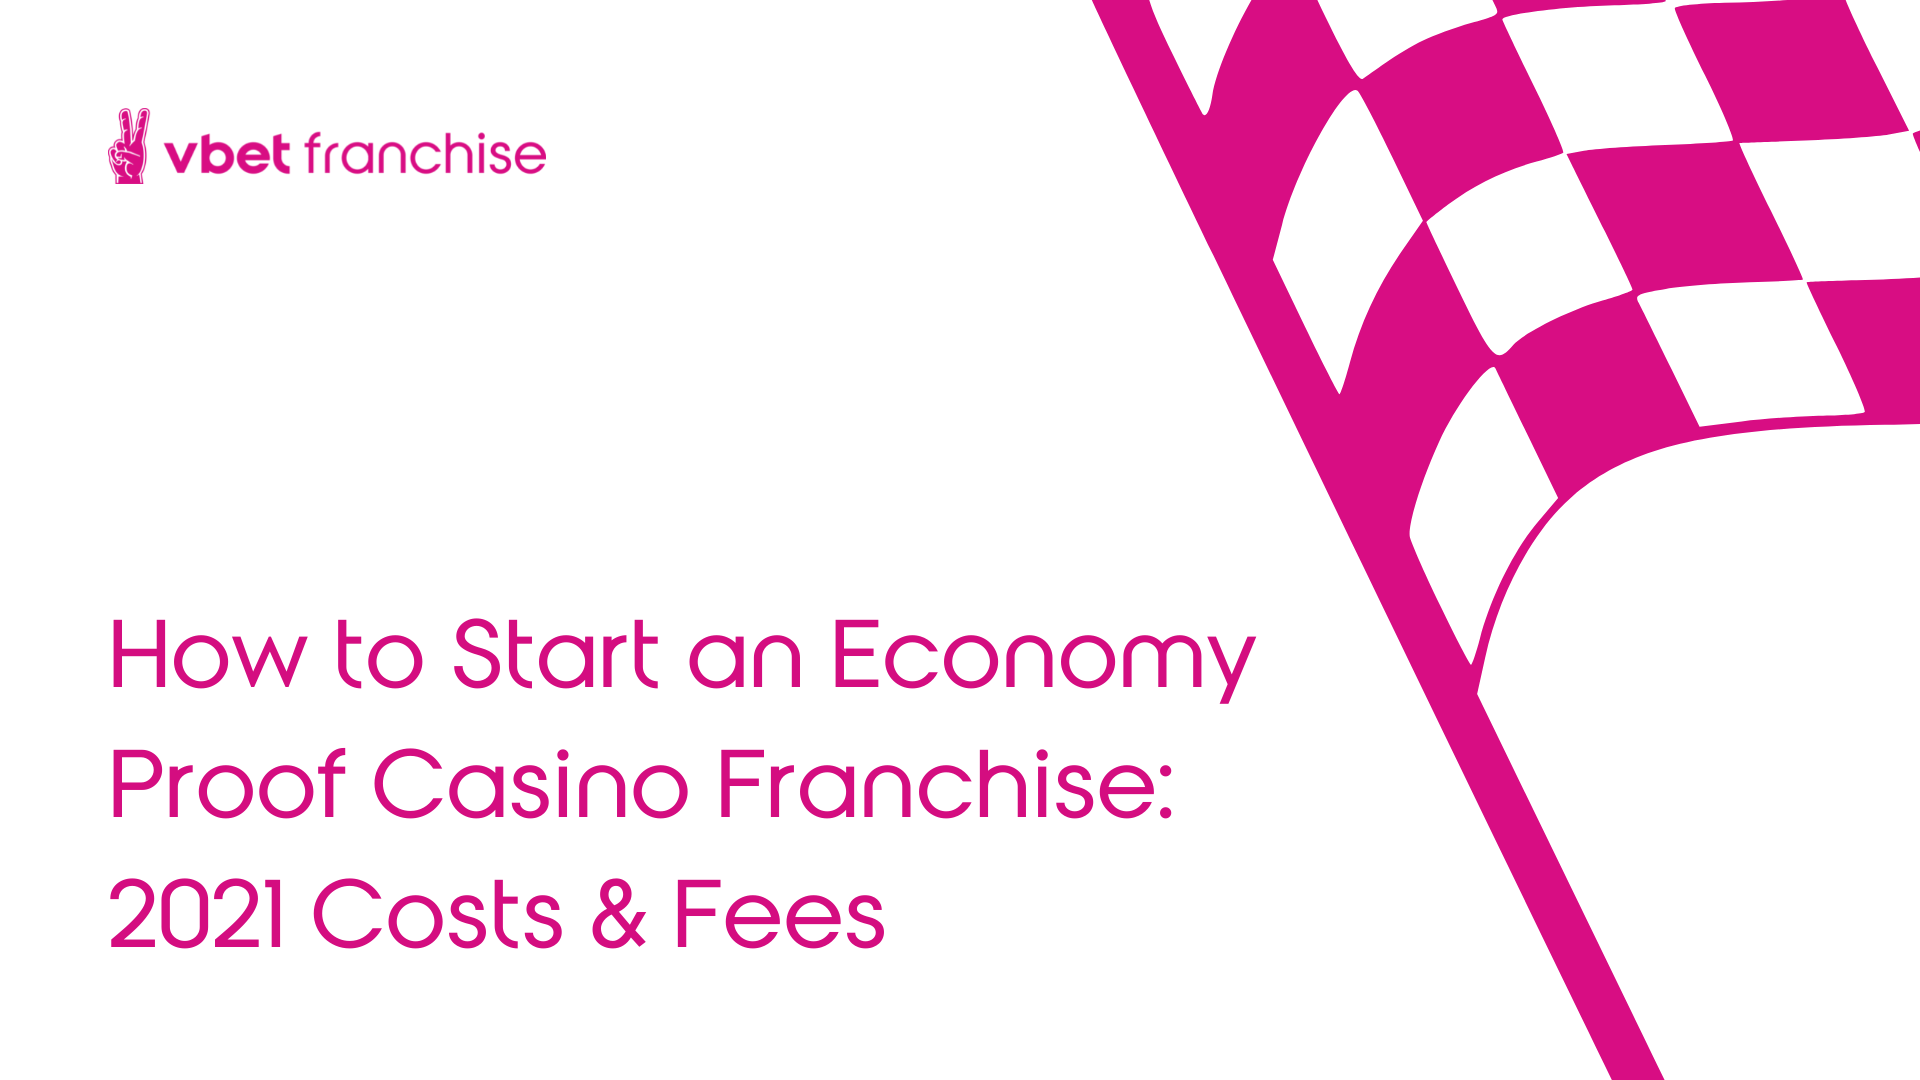 How to Start an Economy Proof Casino Franchise: 2021 Costs & Fees